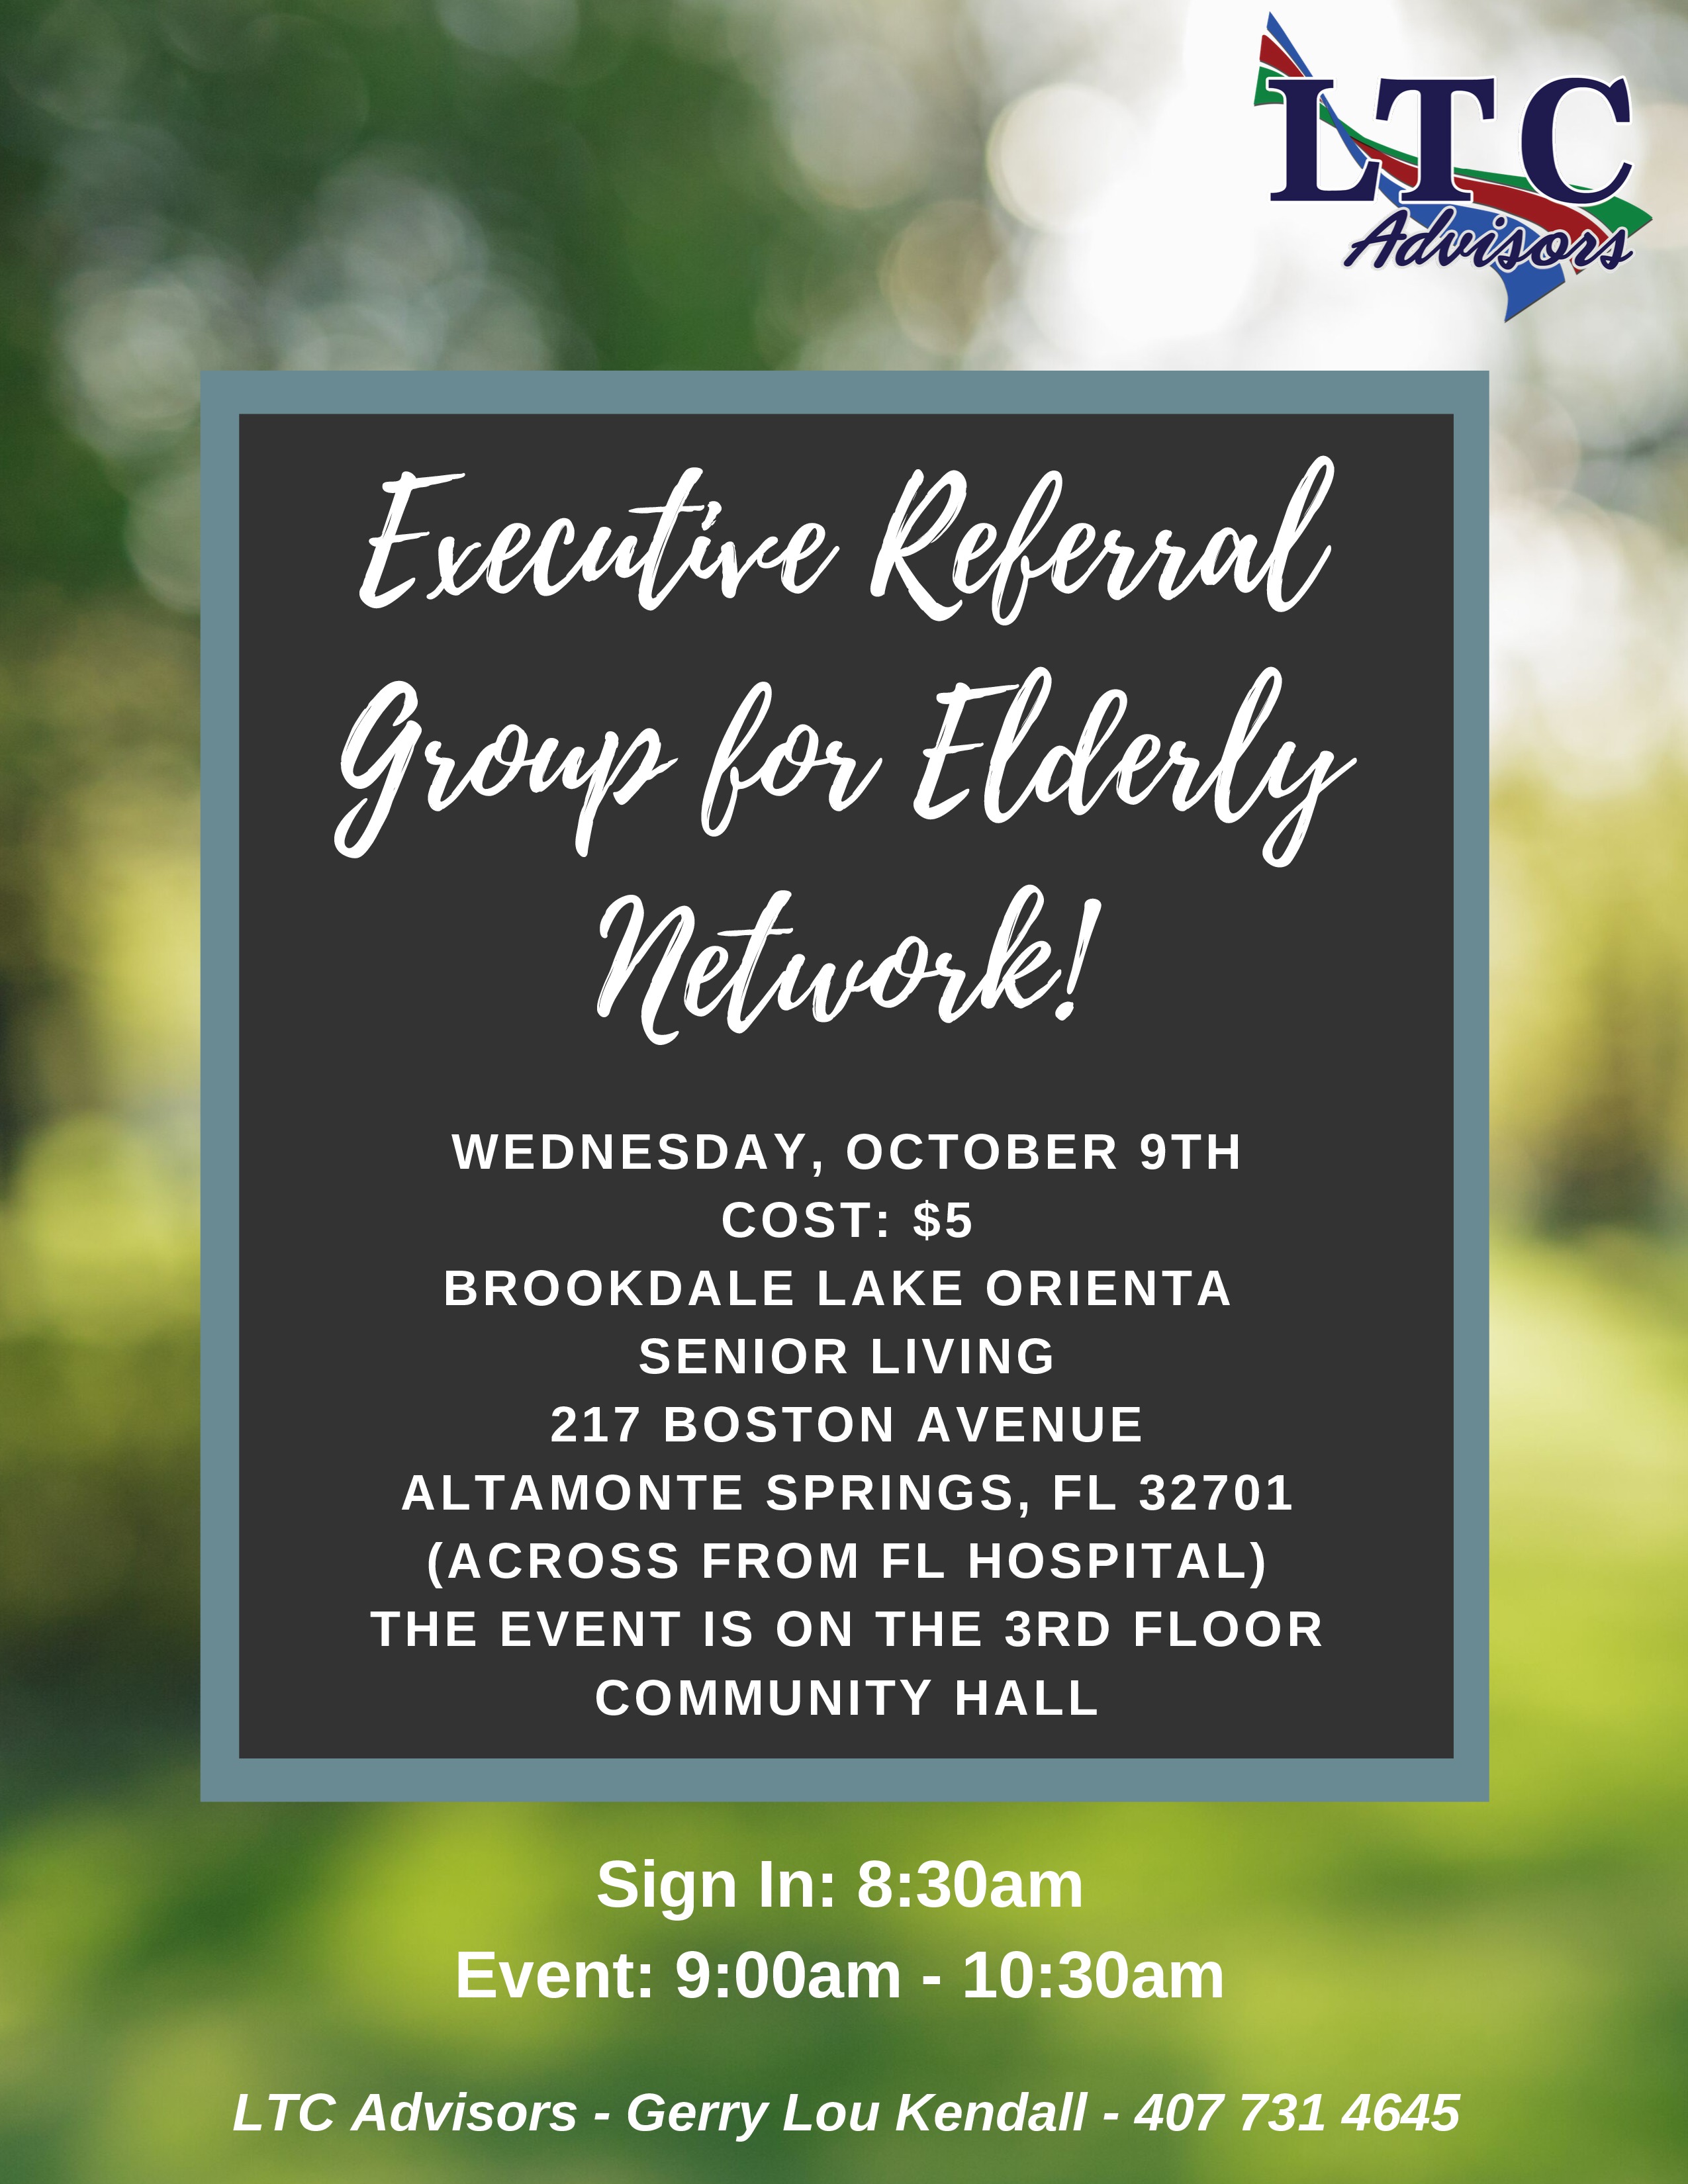 Executive Referral Group for Elderly Network